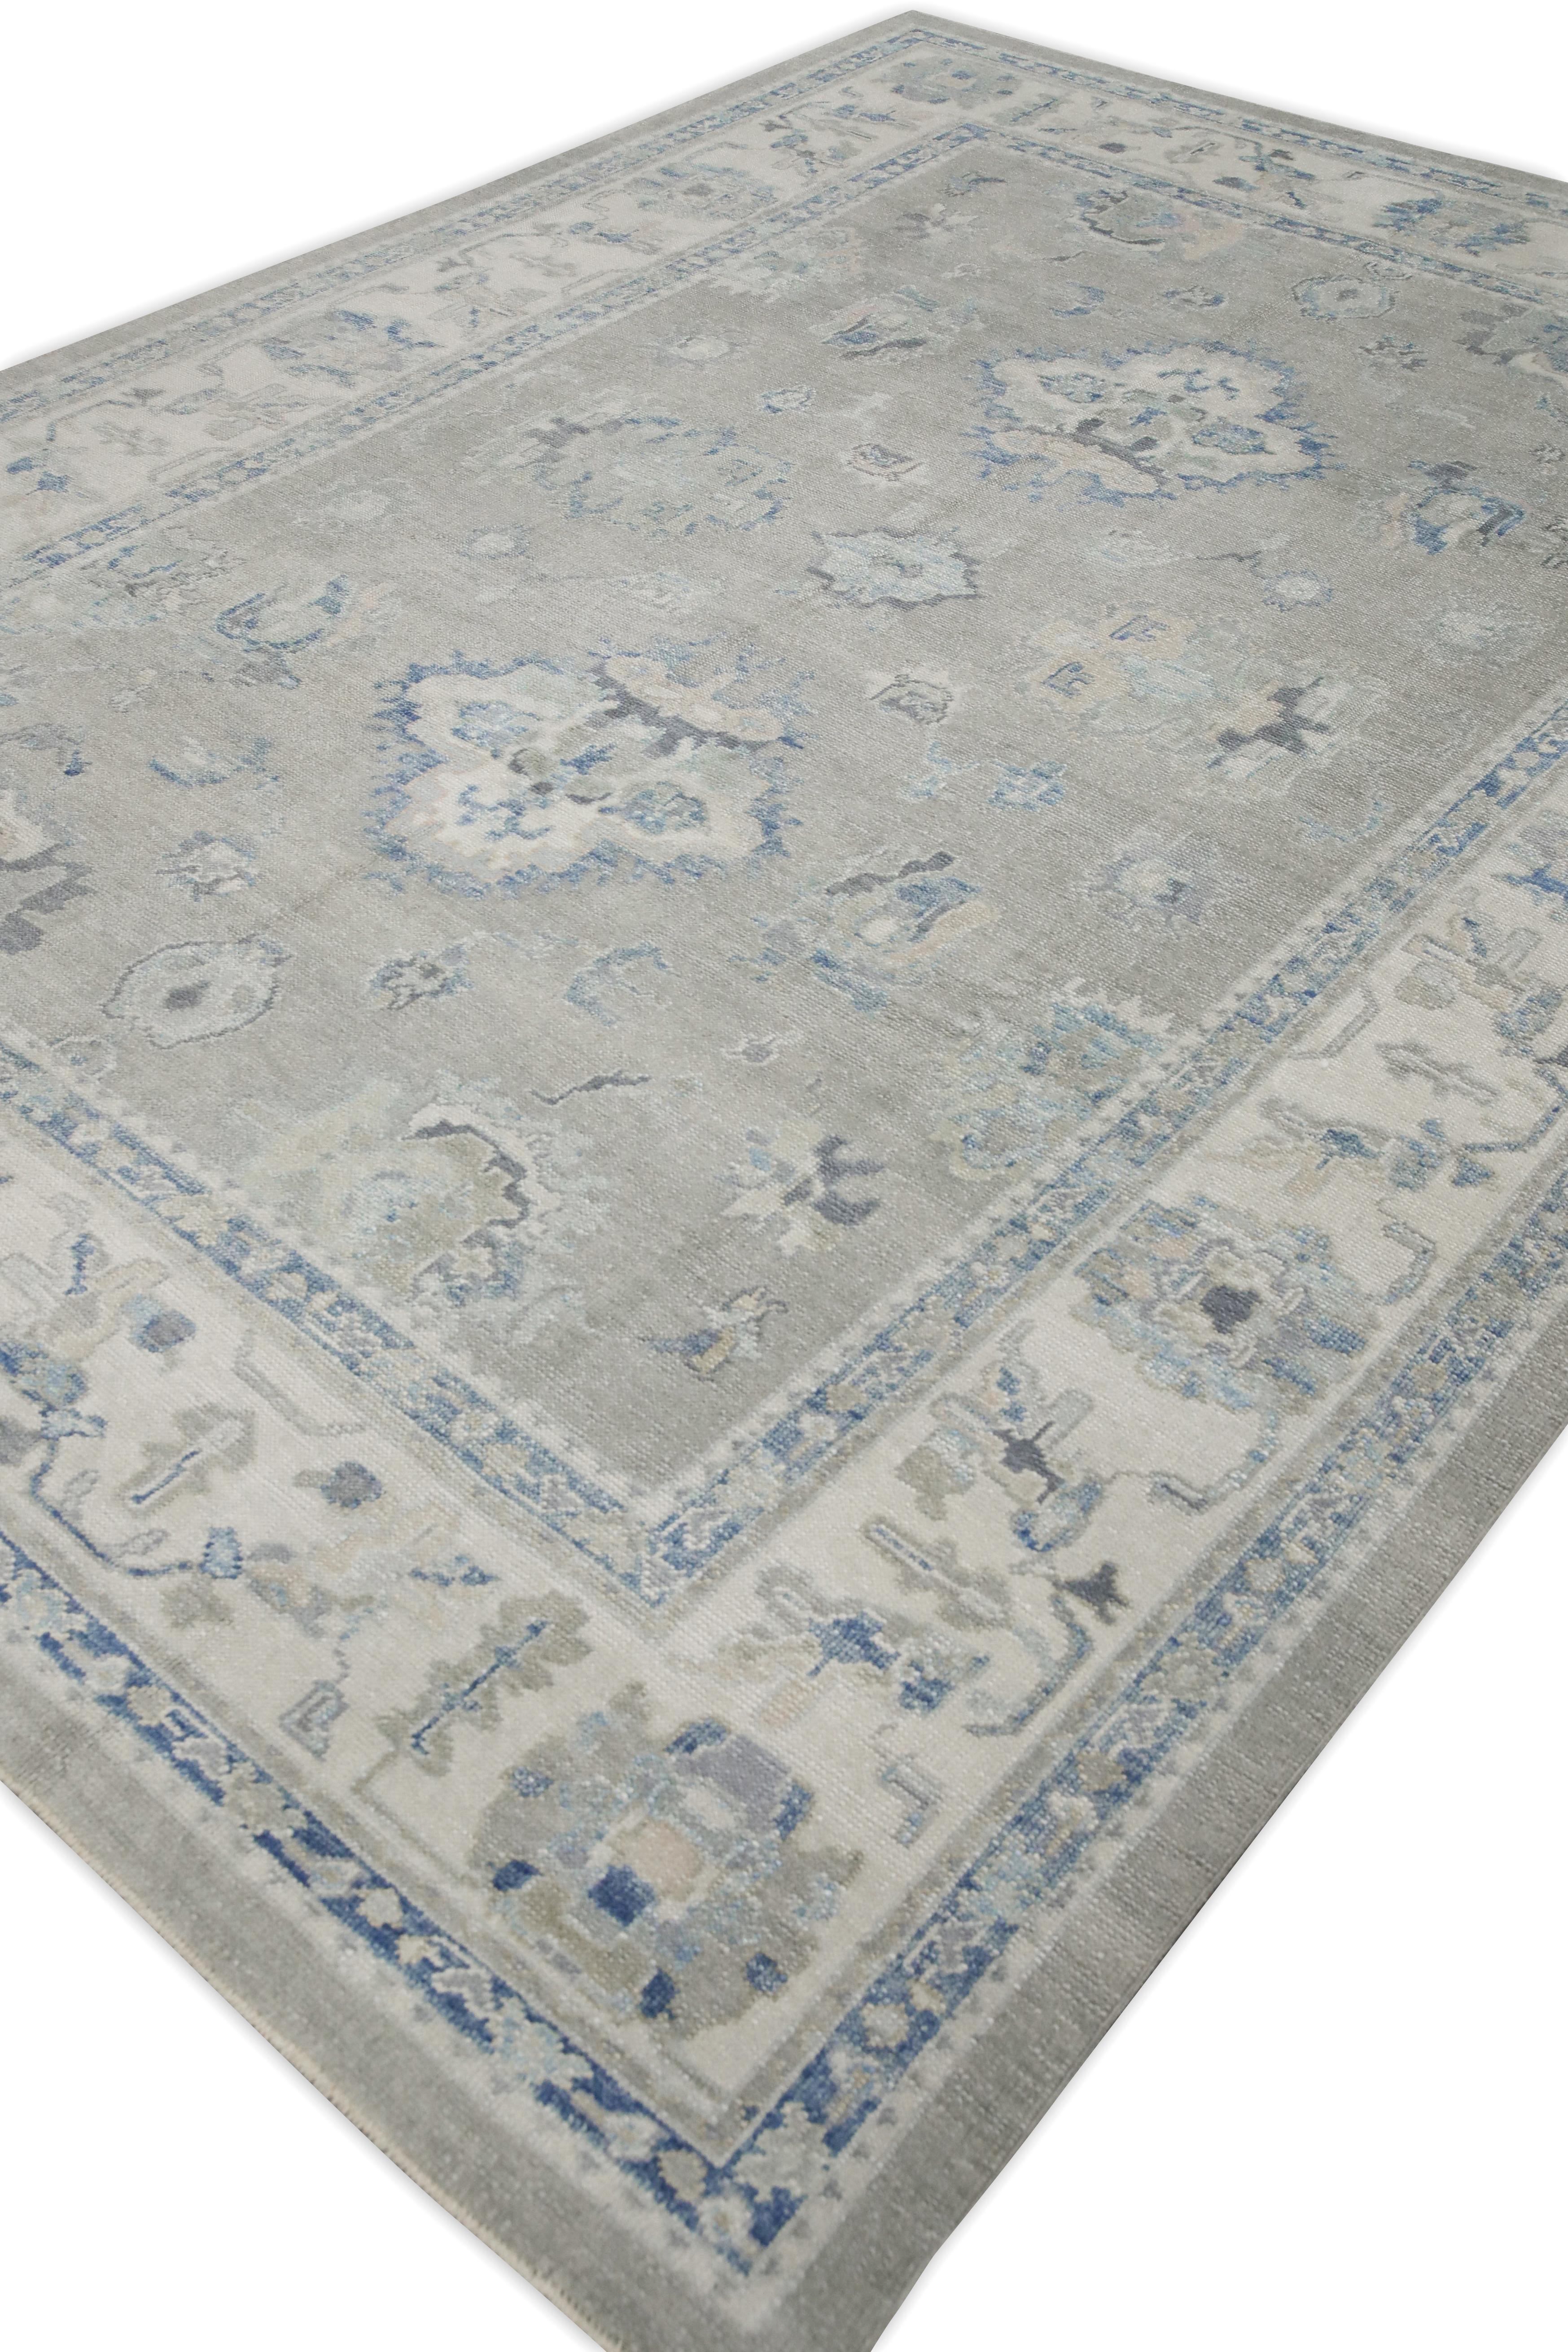 Contemporary Blue & Green Floral Design Handwoven Wool Turkish Oushak Rug 8'8